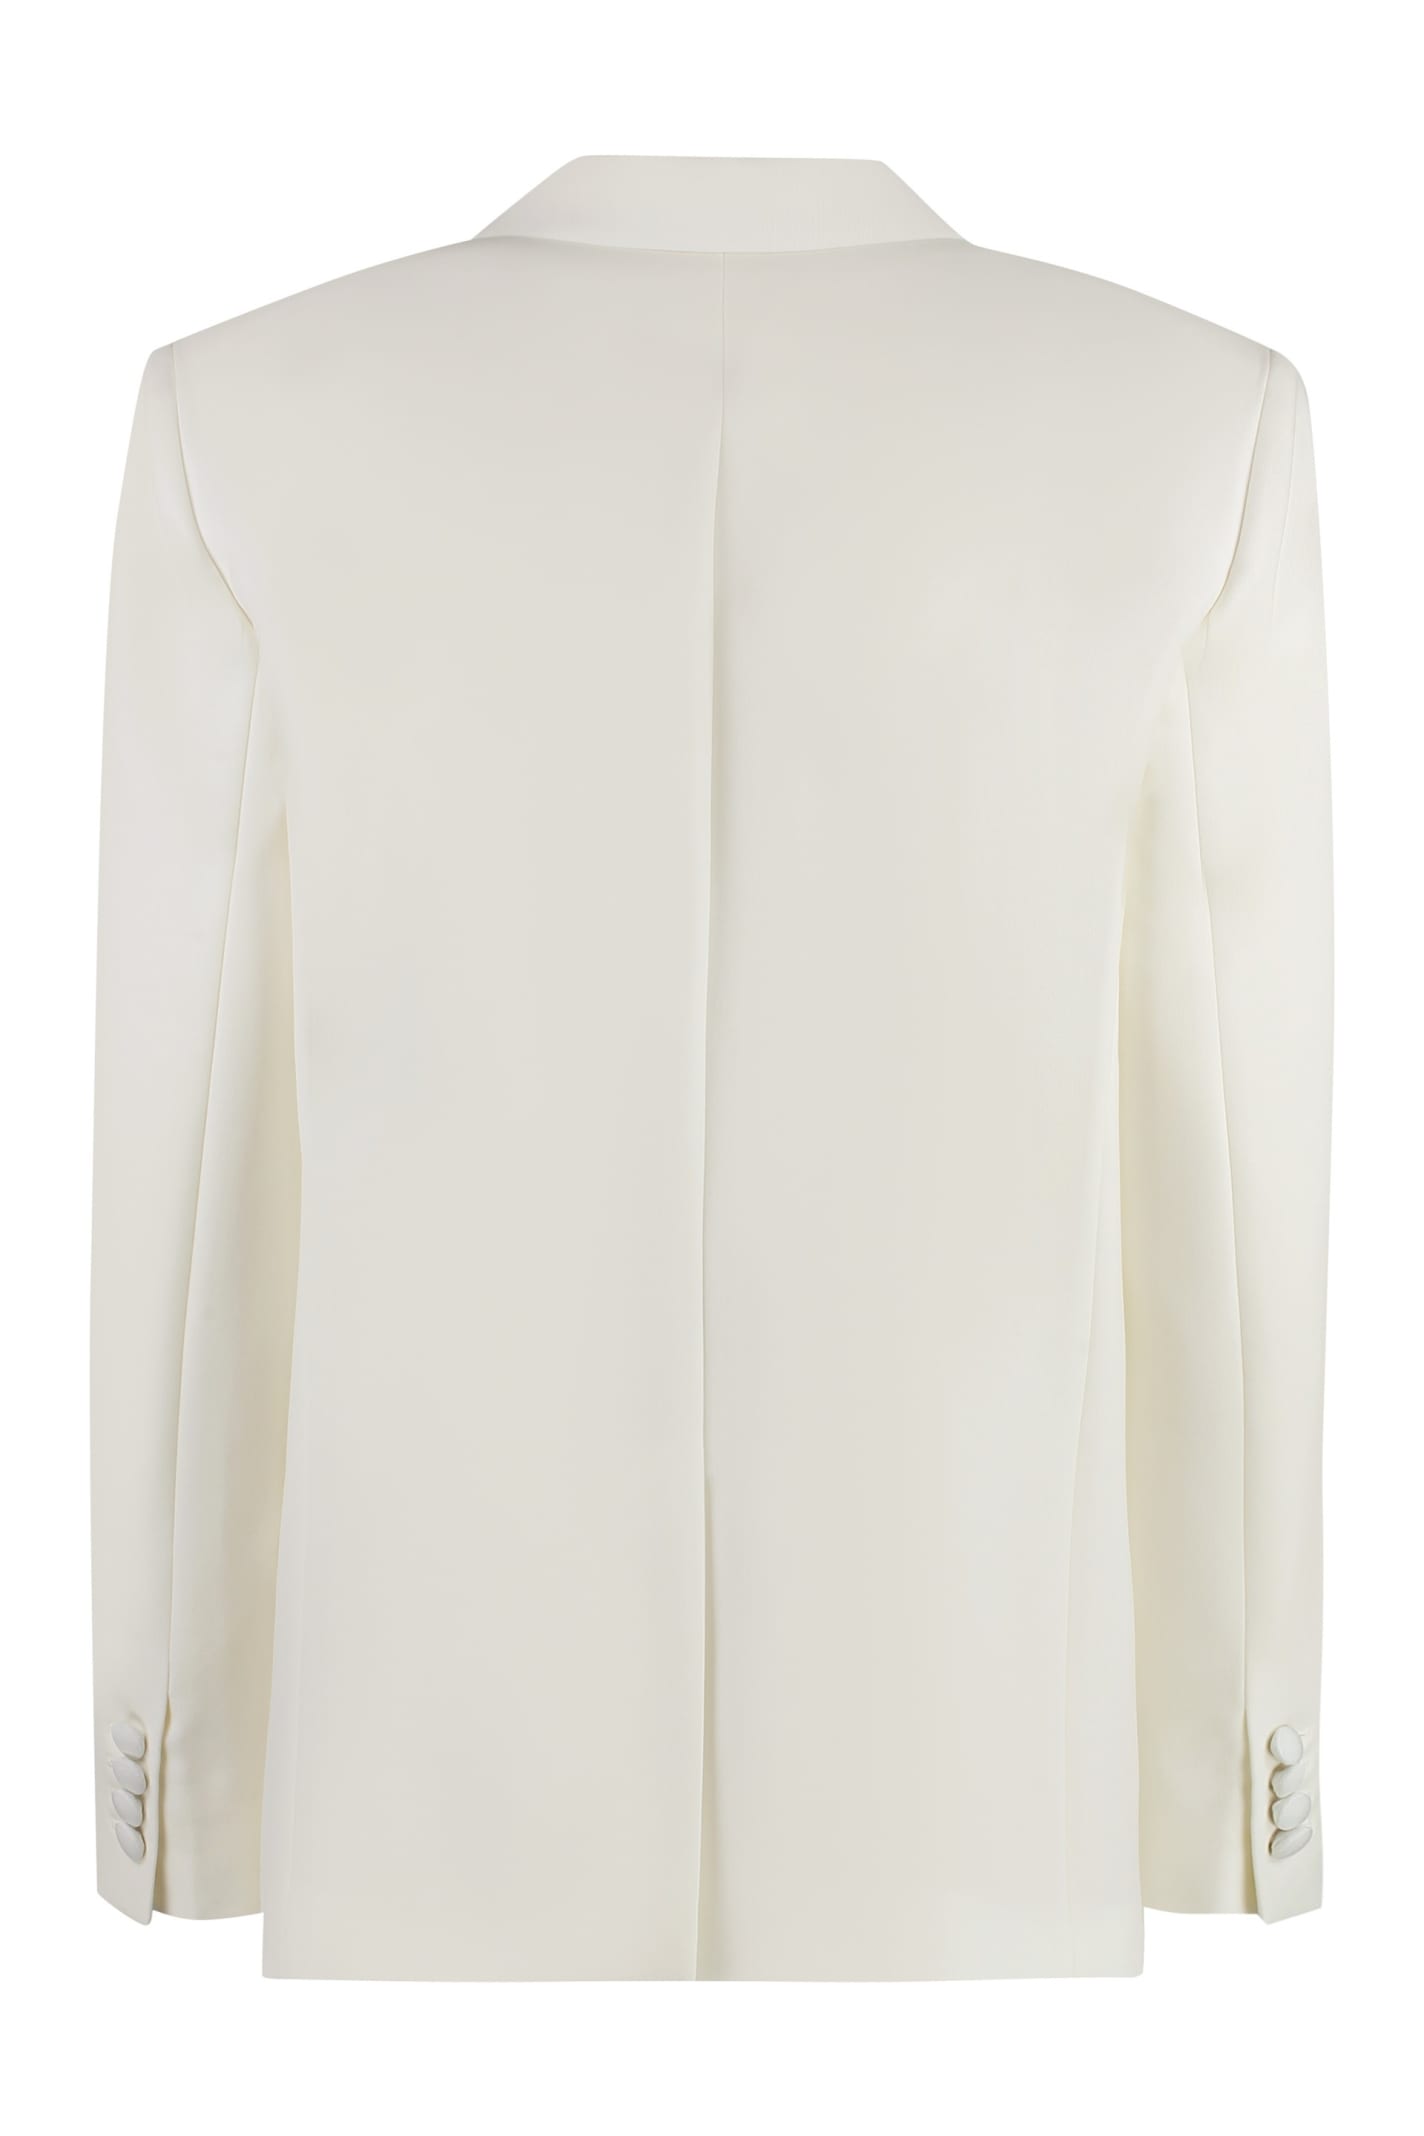 Shop Stella Mccartney Wool Blazer With Two Buttons In White